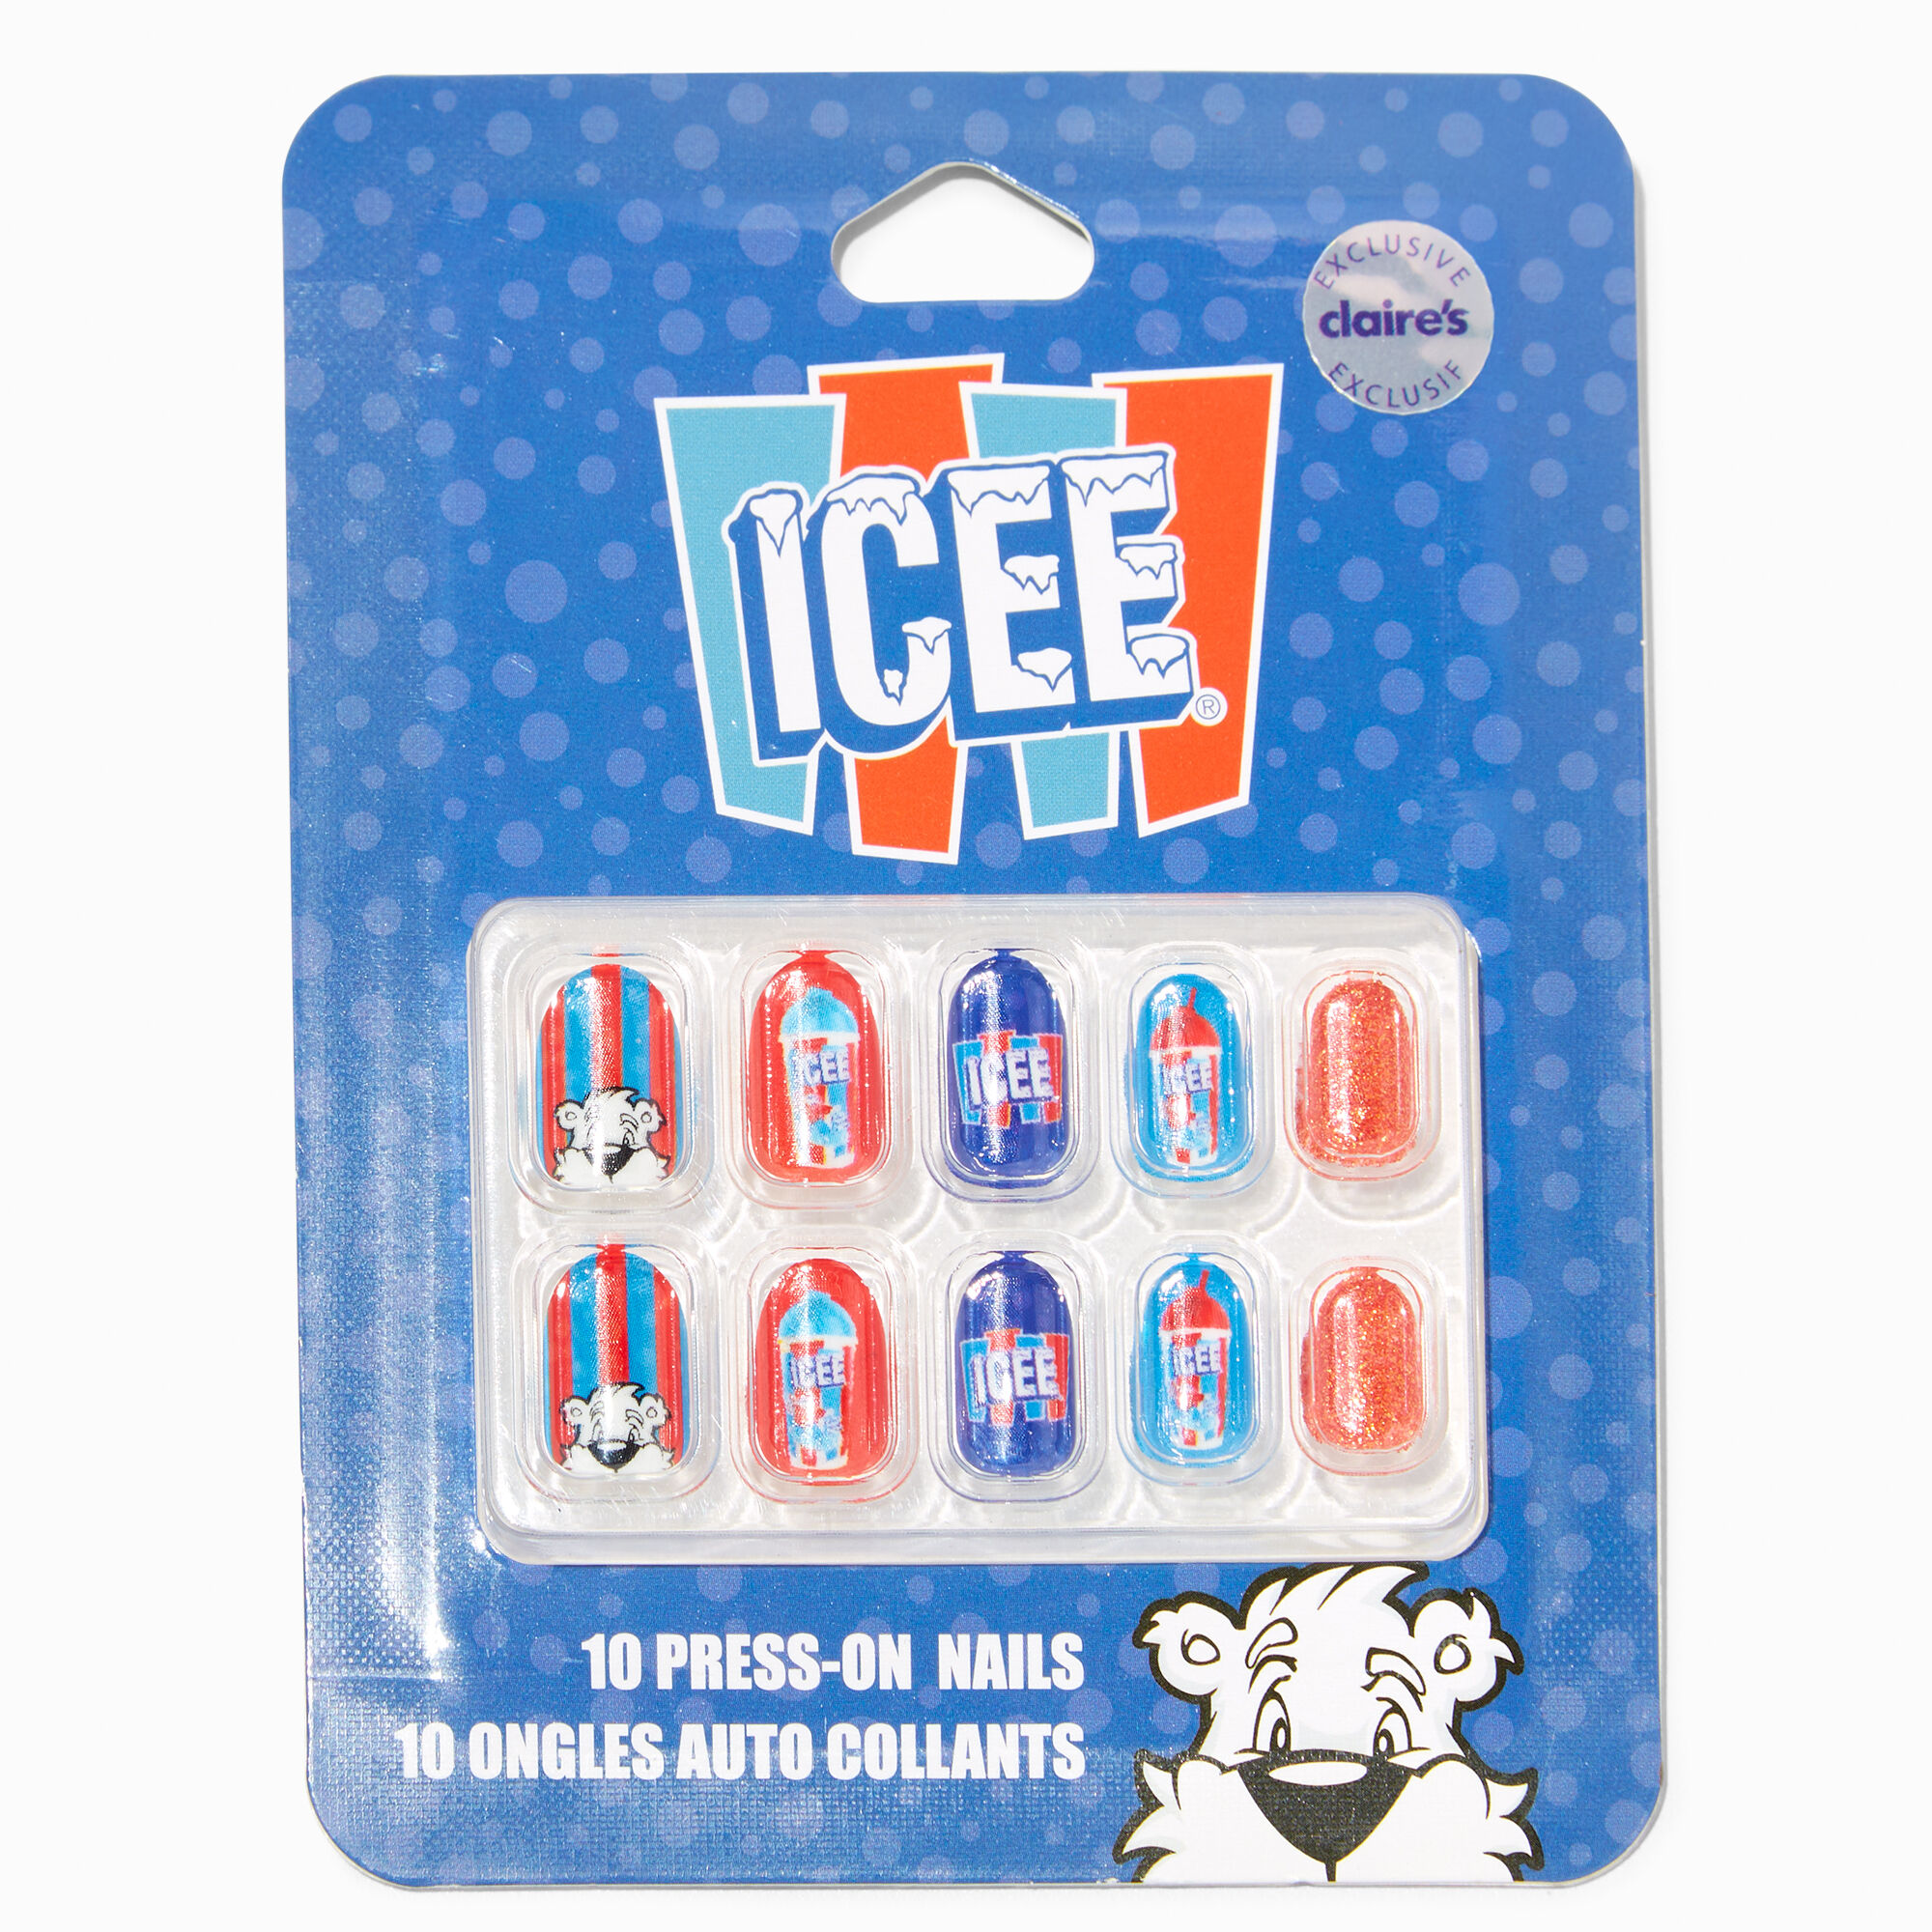 View Icee Claires Exclusive Stiletto Press On Vegan Faux Nail Set 10 Pack information